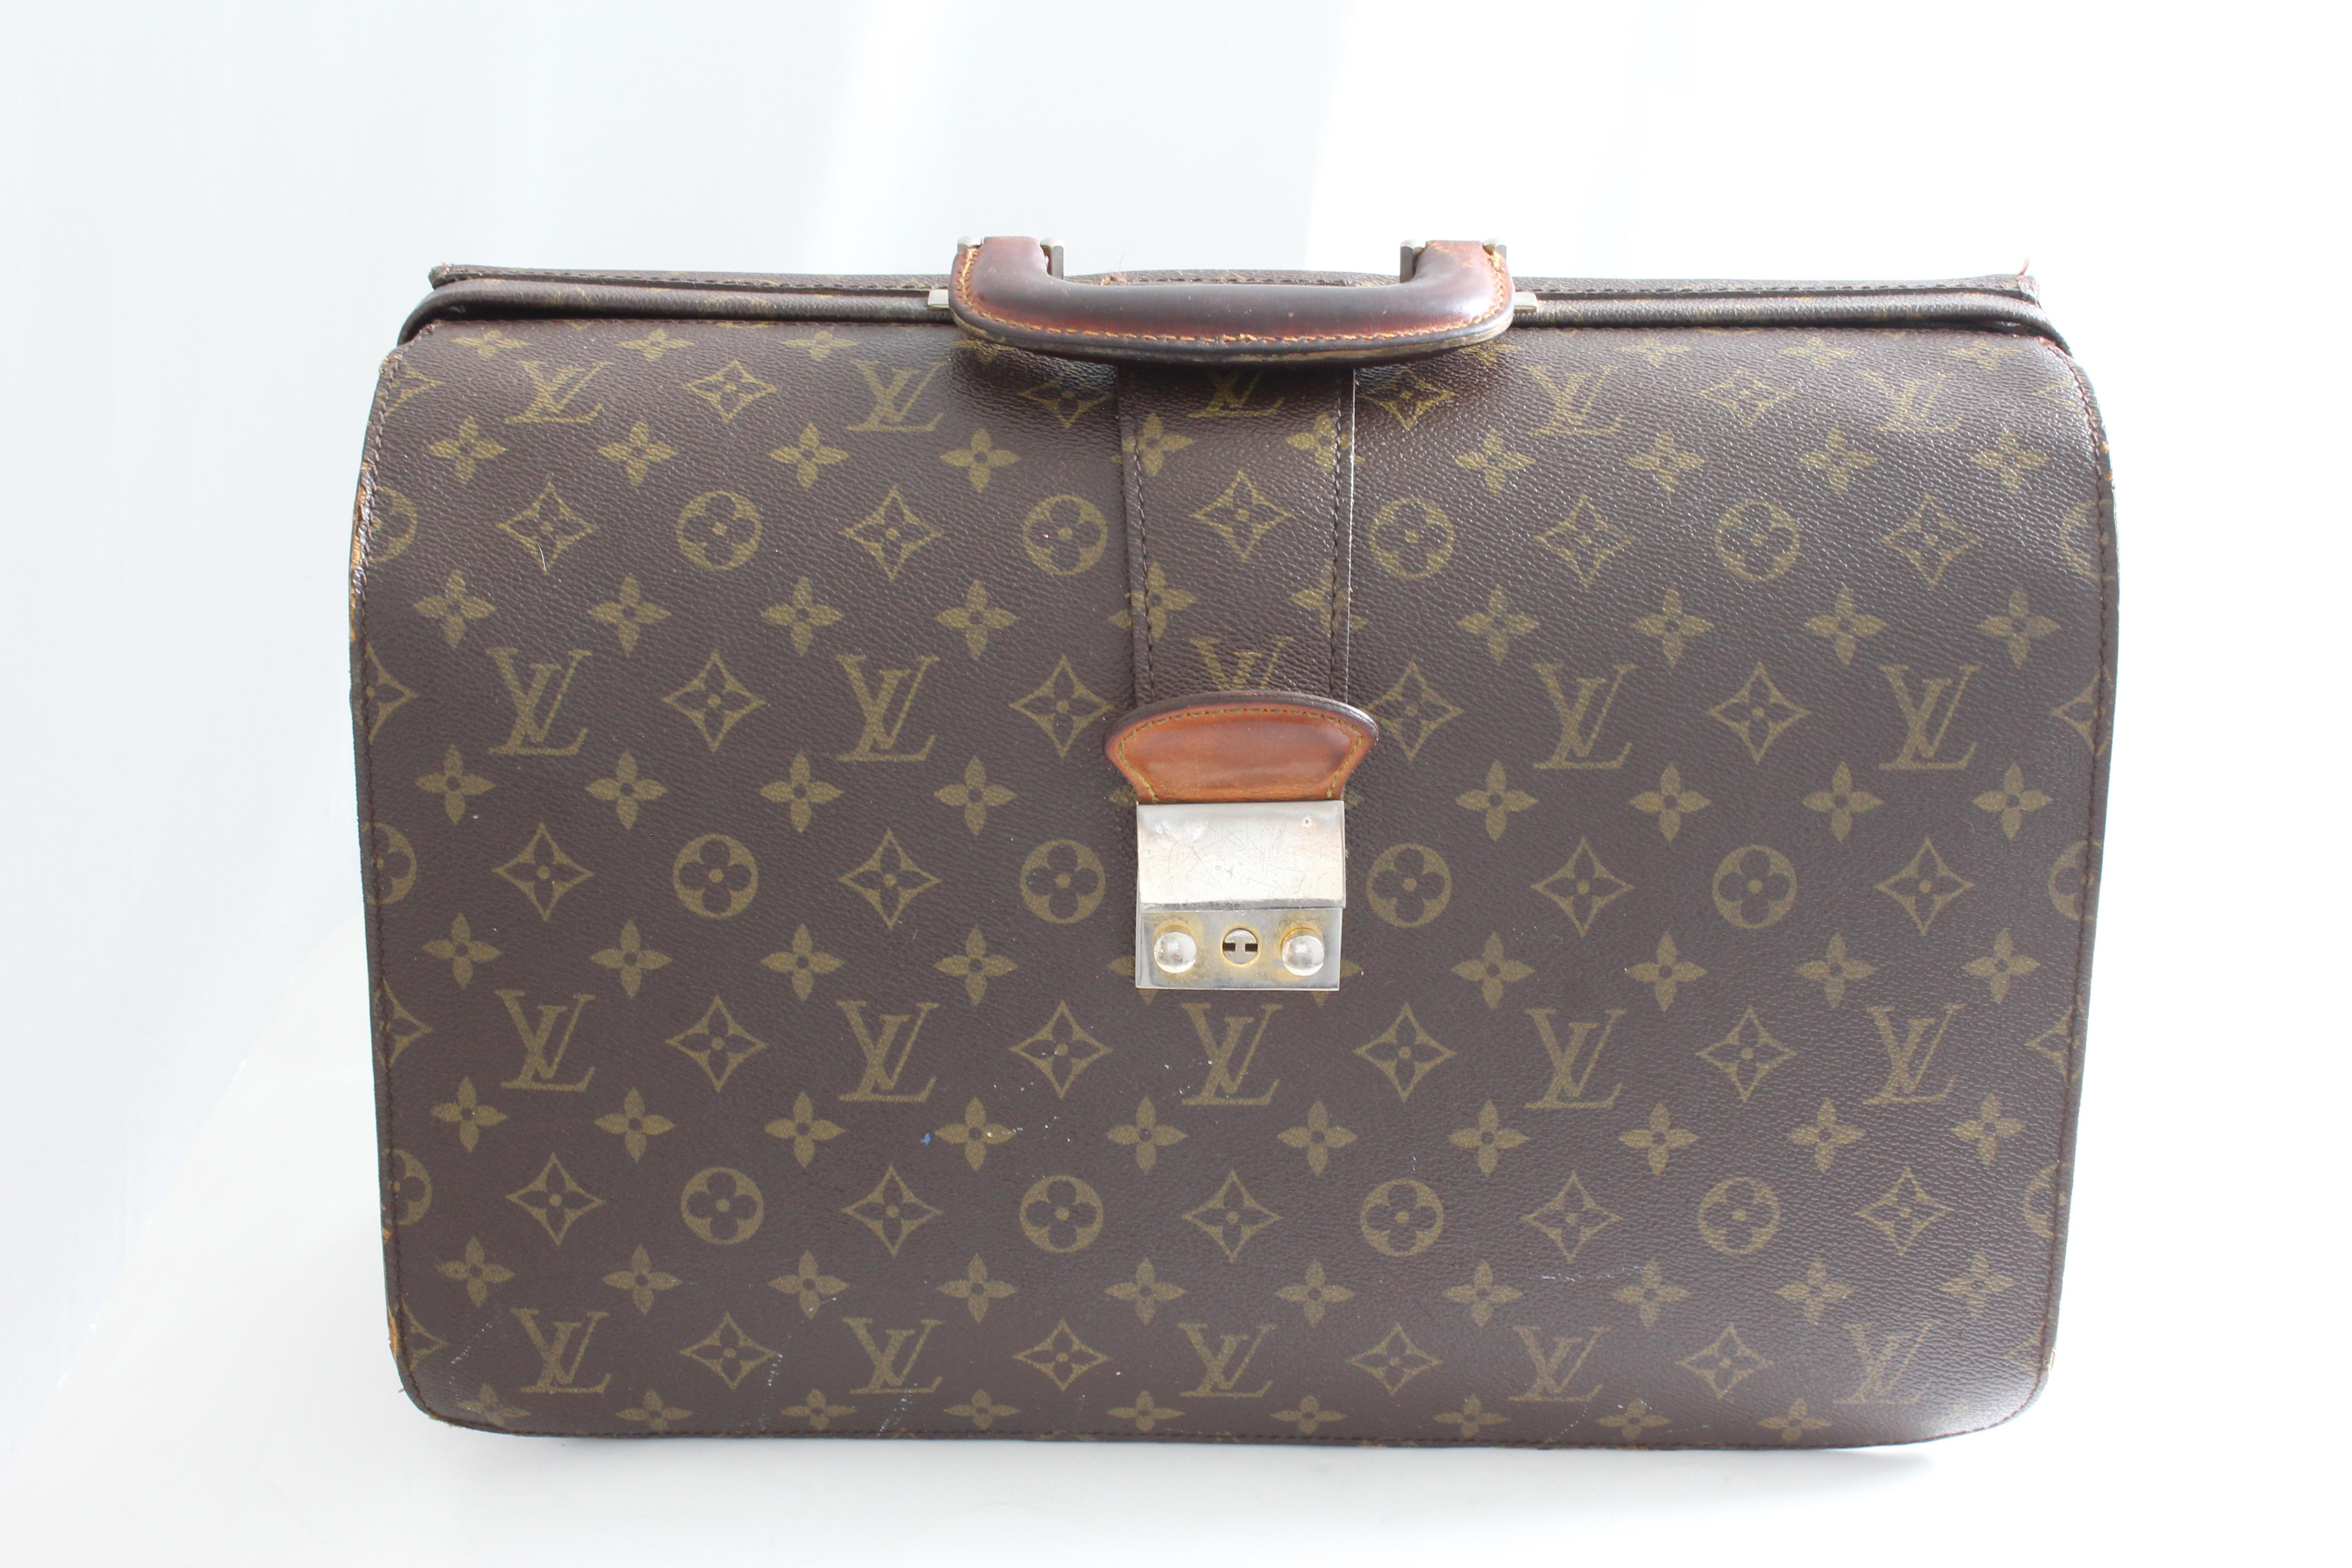 Work and travel in style with this vintage Serviette Fermoir briefcase or business bag, made by Louis Vuitton and sold by Saks 5th Avenue, most likely in the 1980s. Made from LV's signature monogram canvas, it features a leather handle and three